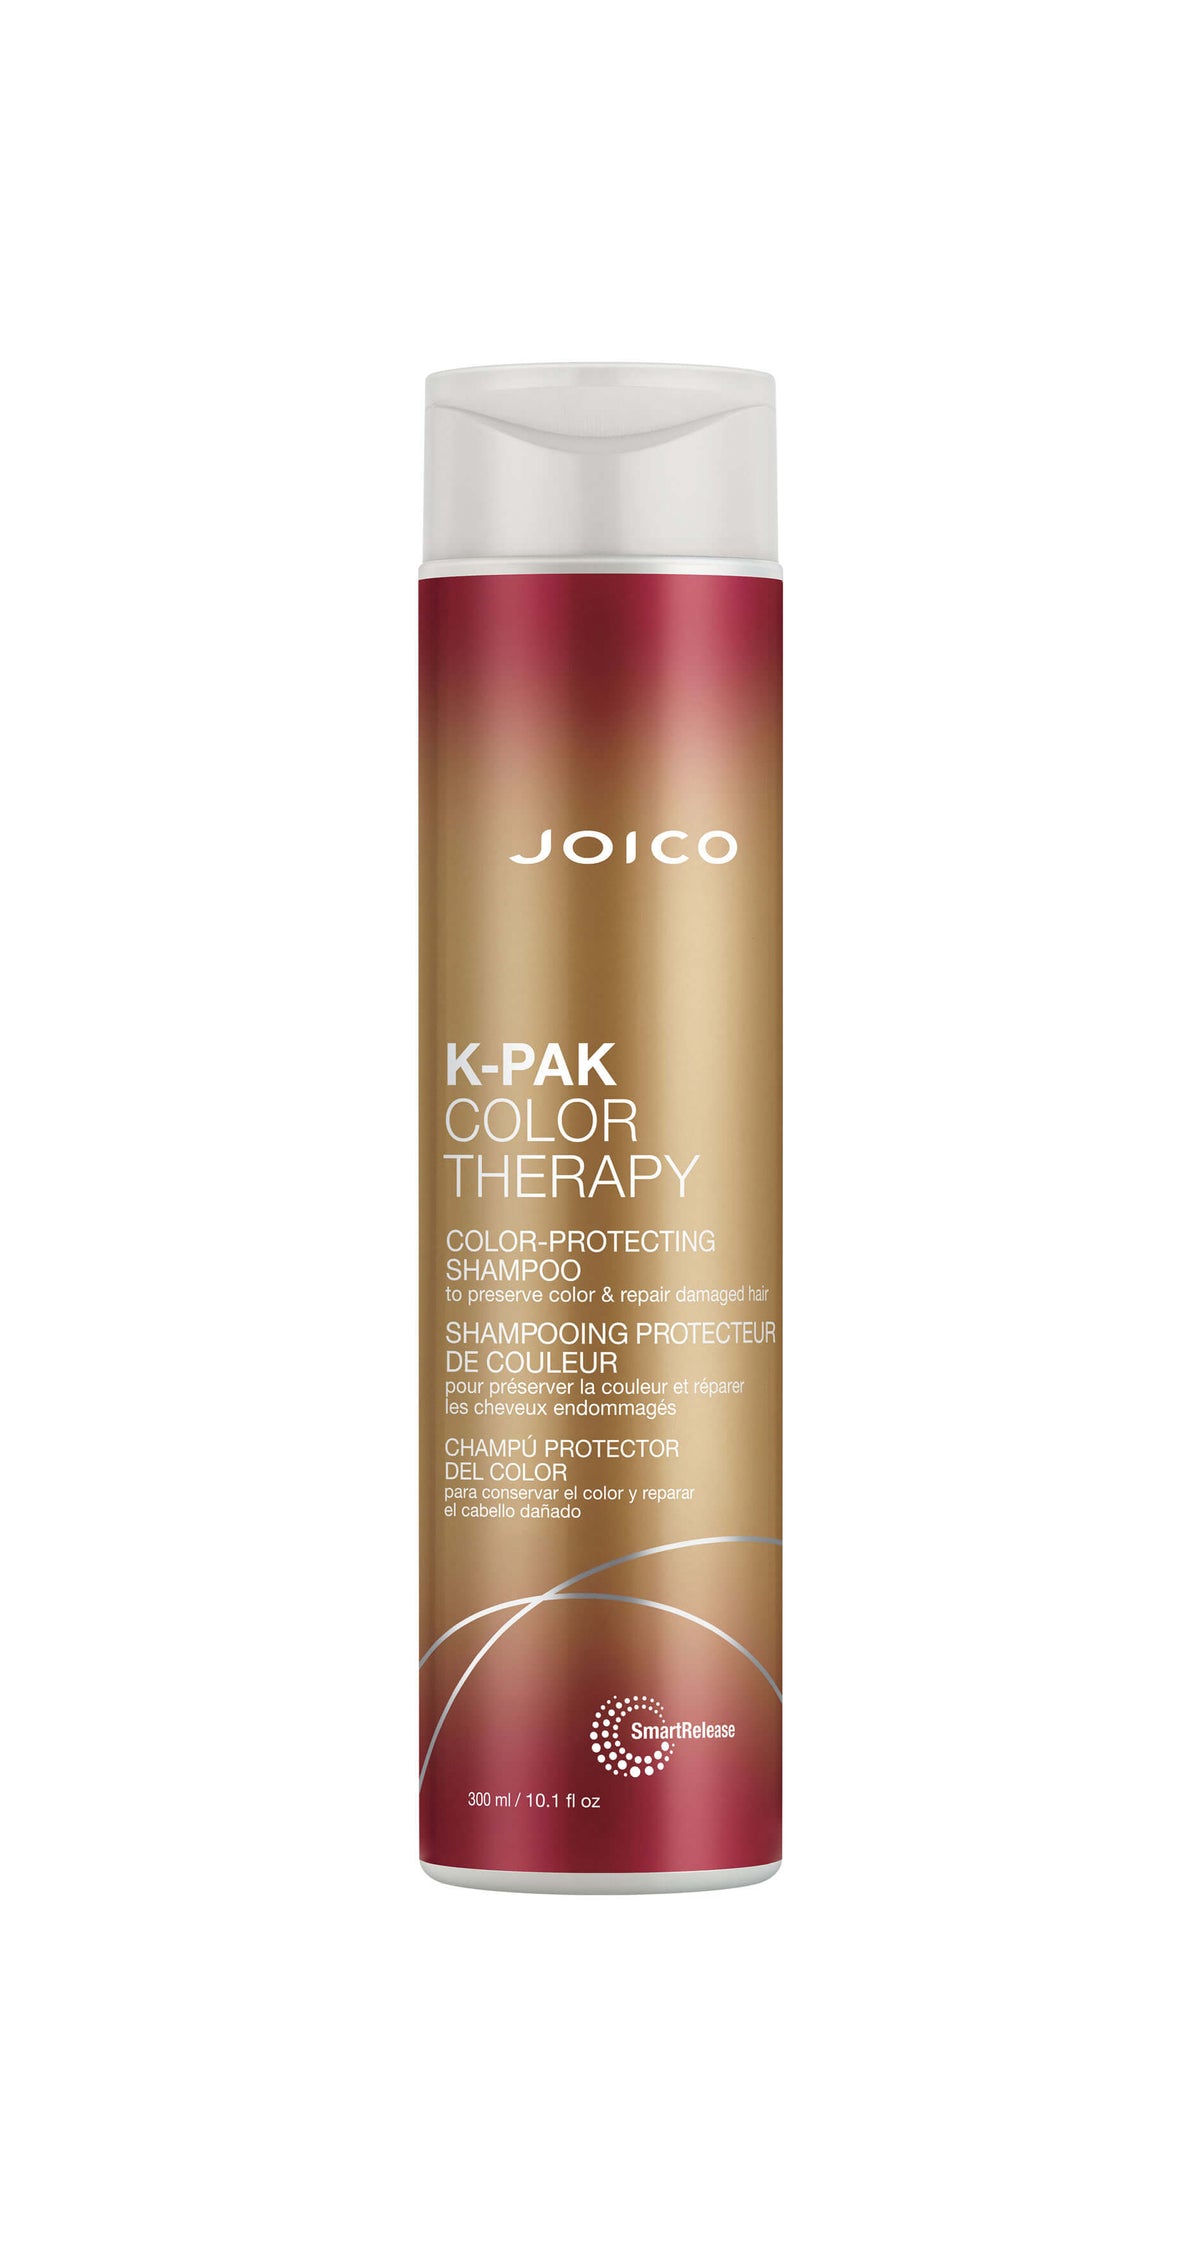 Joico K-Pak Color Therapy Color-Protecting Shampoo 300 ml 